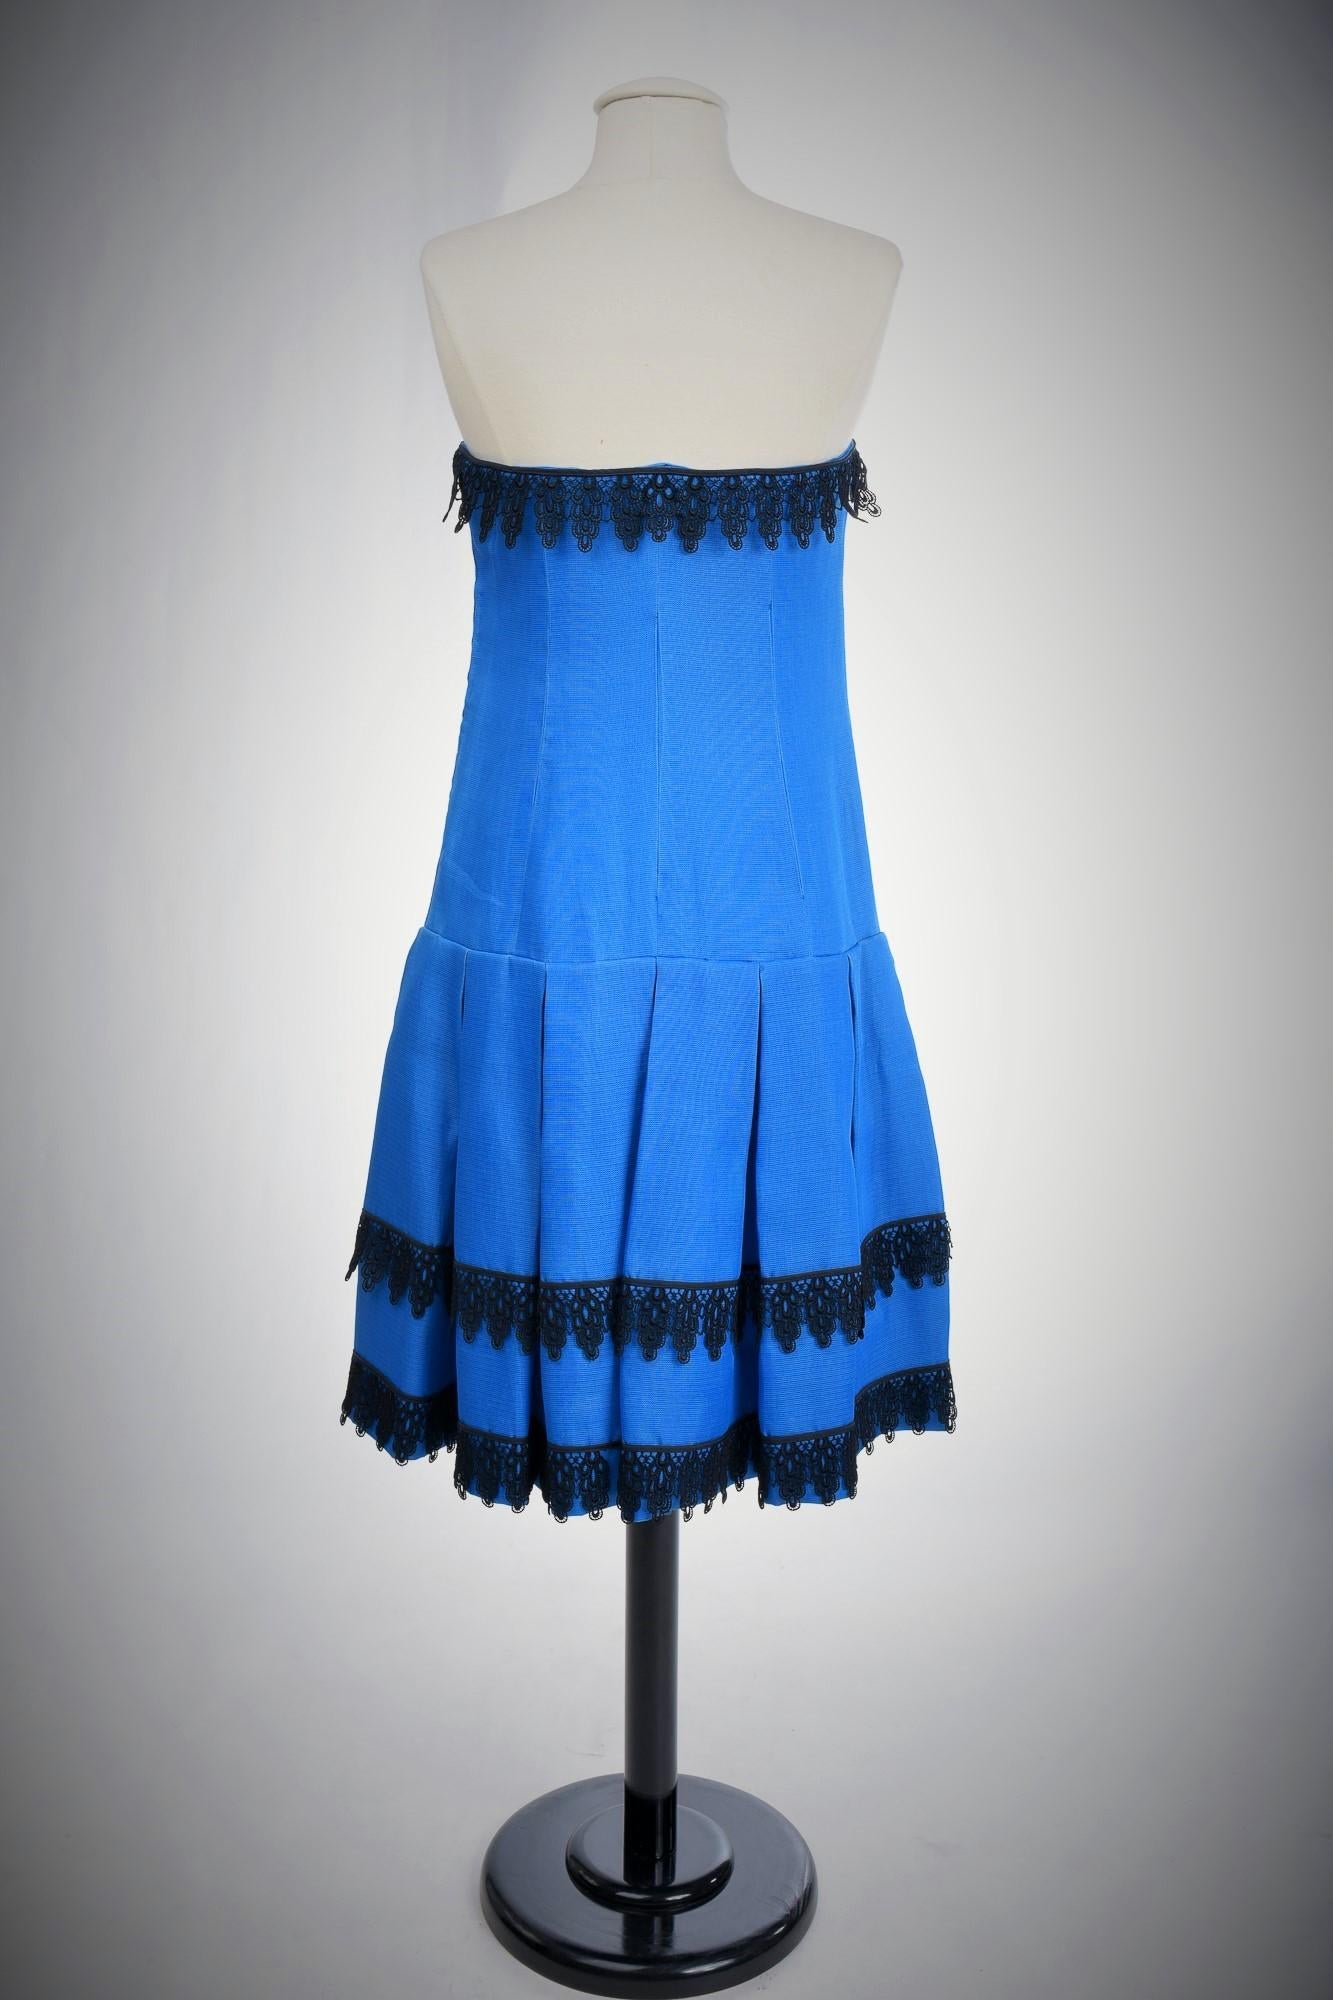 Hubert de Givenchy Cocktail Dress in Gazar Silk and Lace Circa 1968/1970 For Sale 9